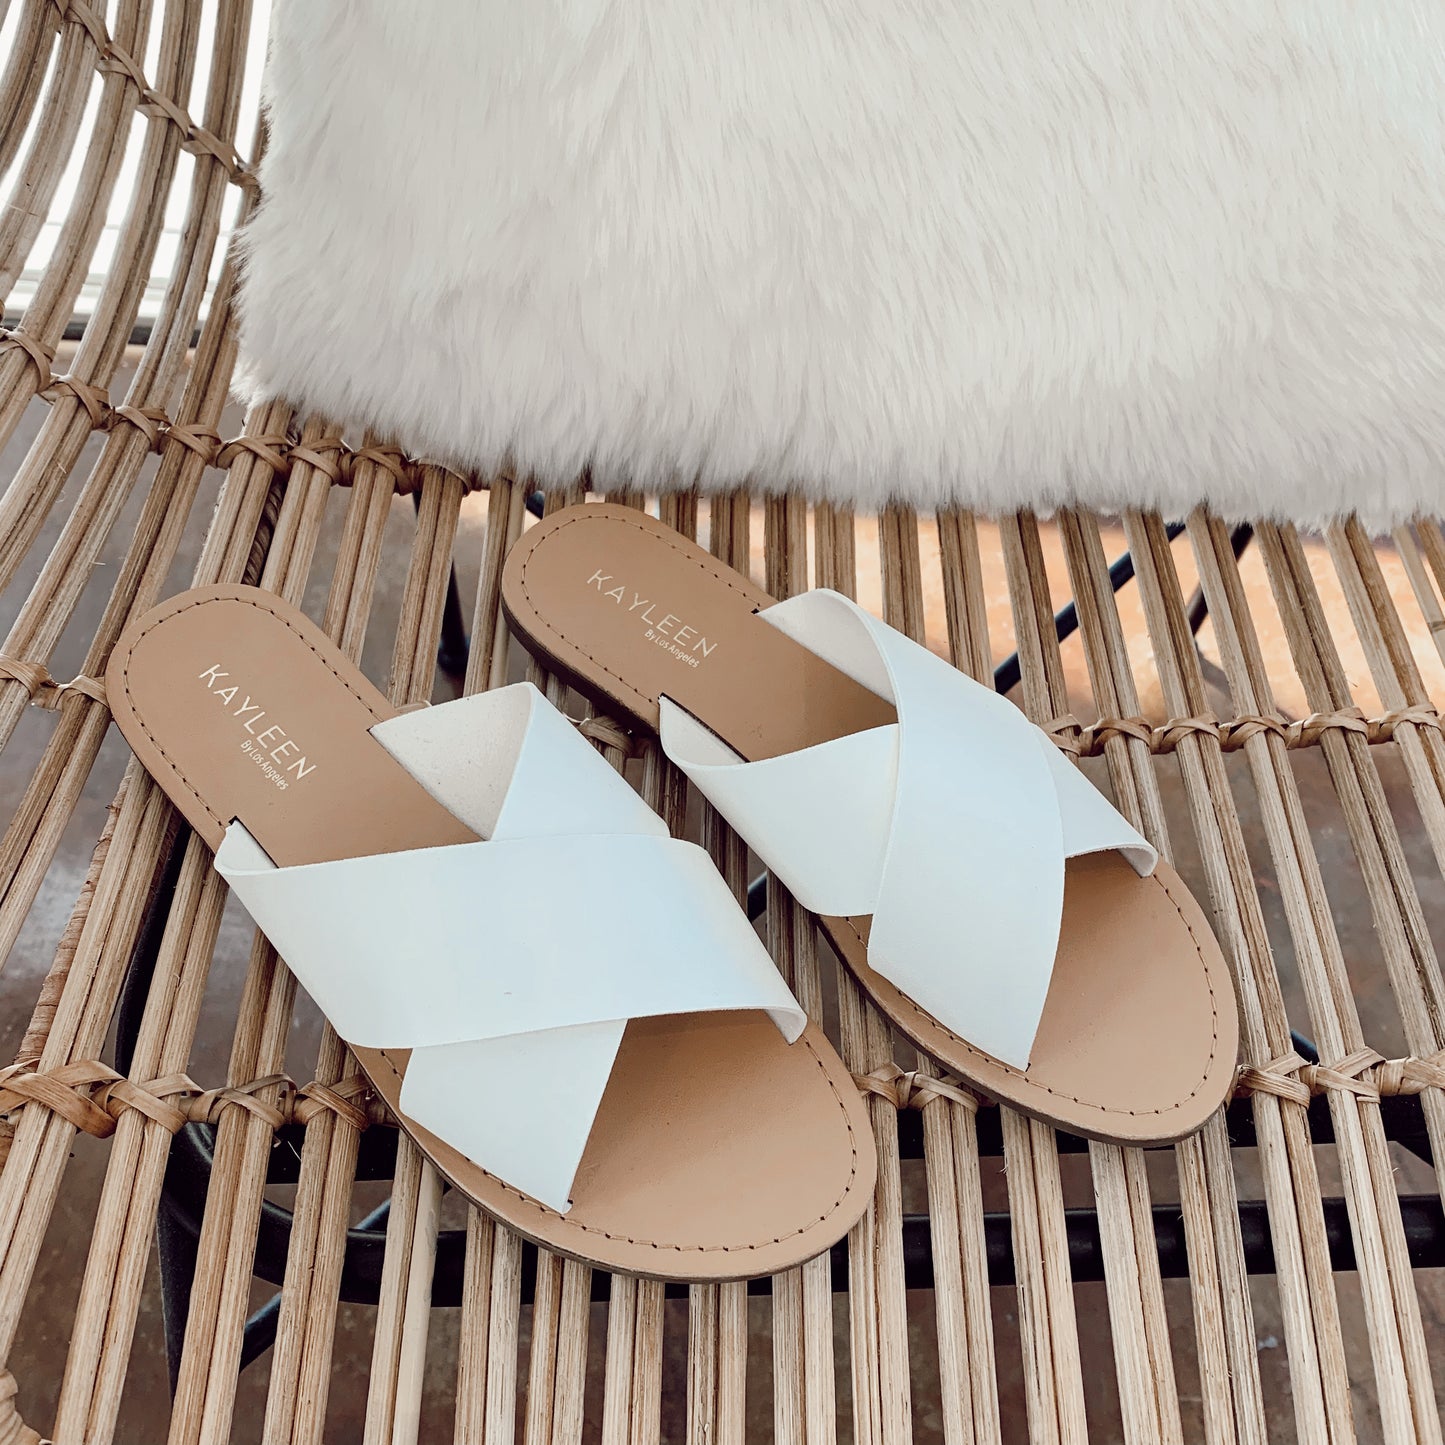 THE CRISS CROSS STRAPPY FLAT SANDAL IN WHITE